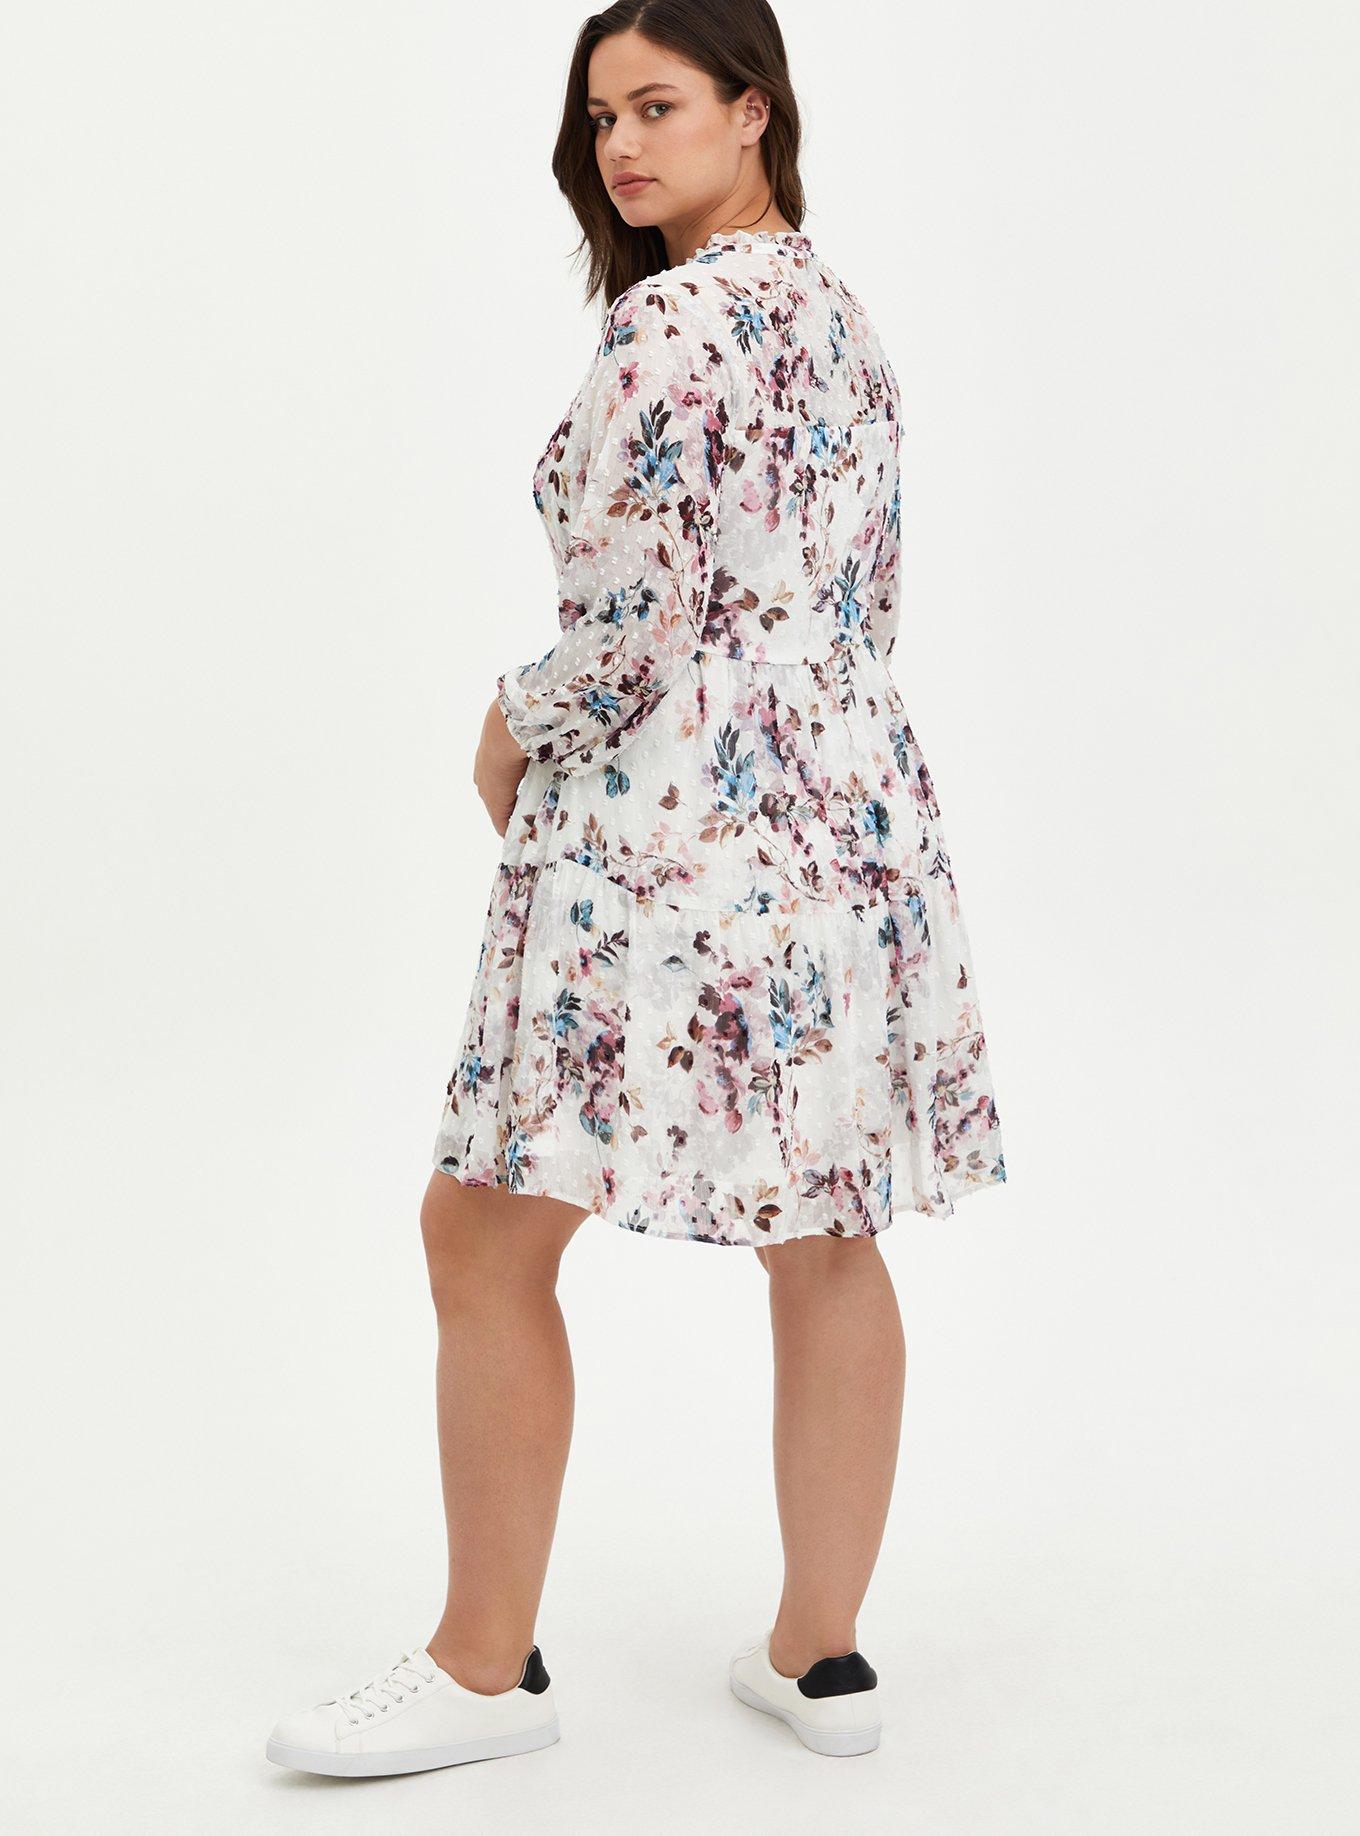 Ivory Floral Chiffon Dress, LOVE IS A ROSE  Chiffon dress, Torrid dresses,  Torrid fashion